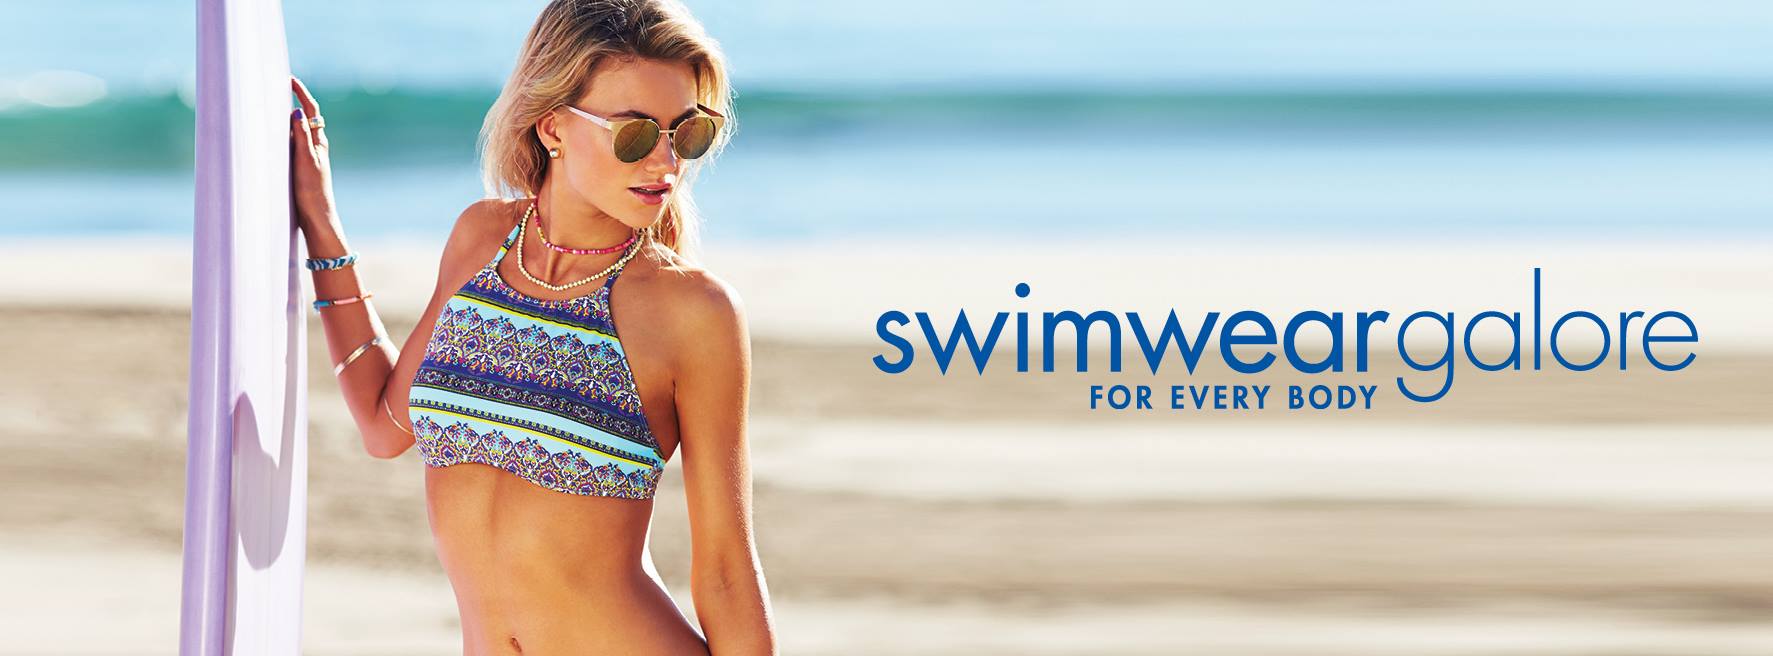 All Swimwear Galore Deals & Promotions